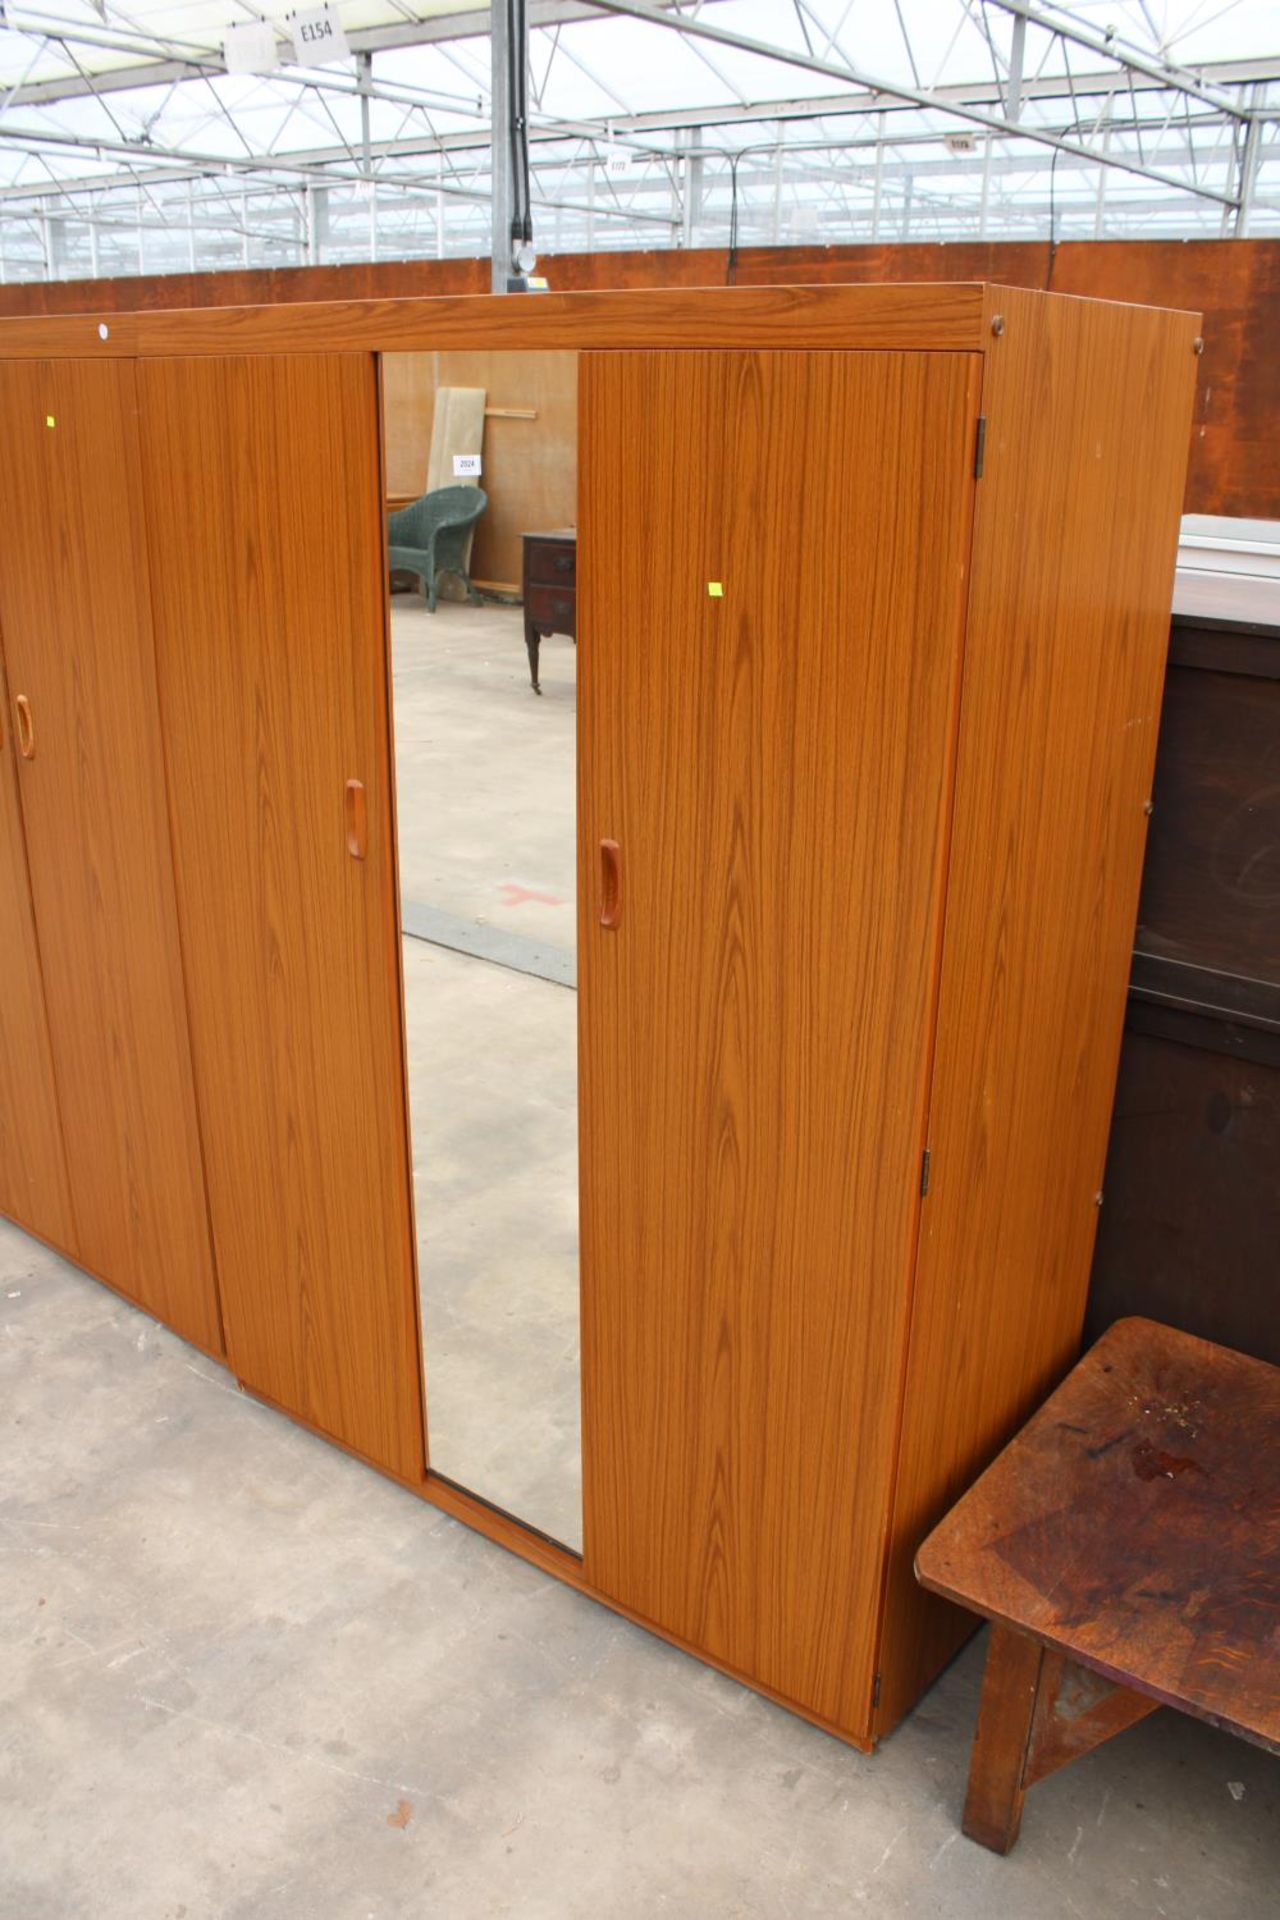 A RETRO SCHRIEBER TWO DOOR WARDROBE WITH MIRRORED CENTRAL SECTION, 47.5" WIDE - Image 2 of 4